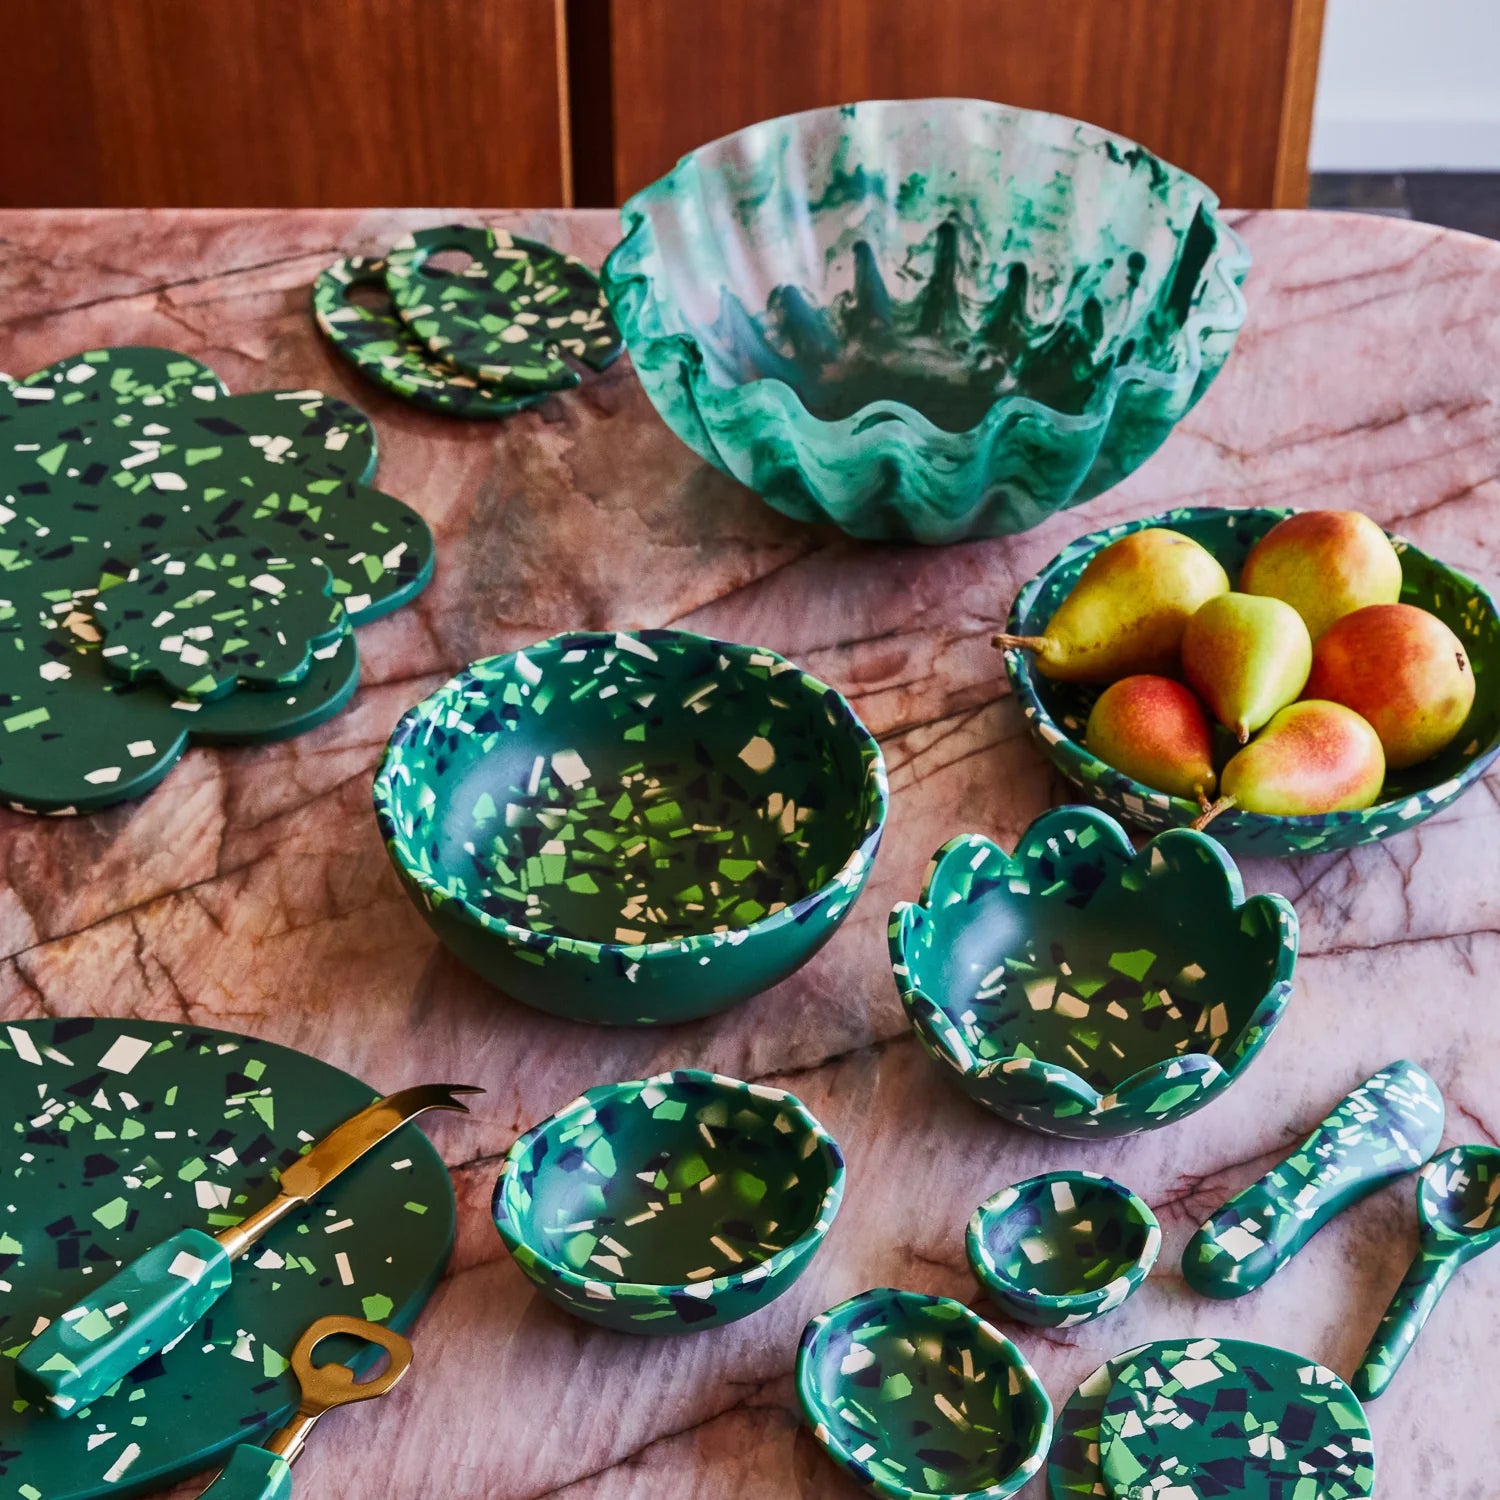 Sage x Clare - Resin Petal Bowl in Pine Terrazzo - The Ivy Room Adelaide